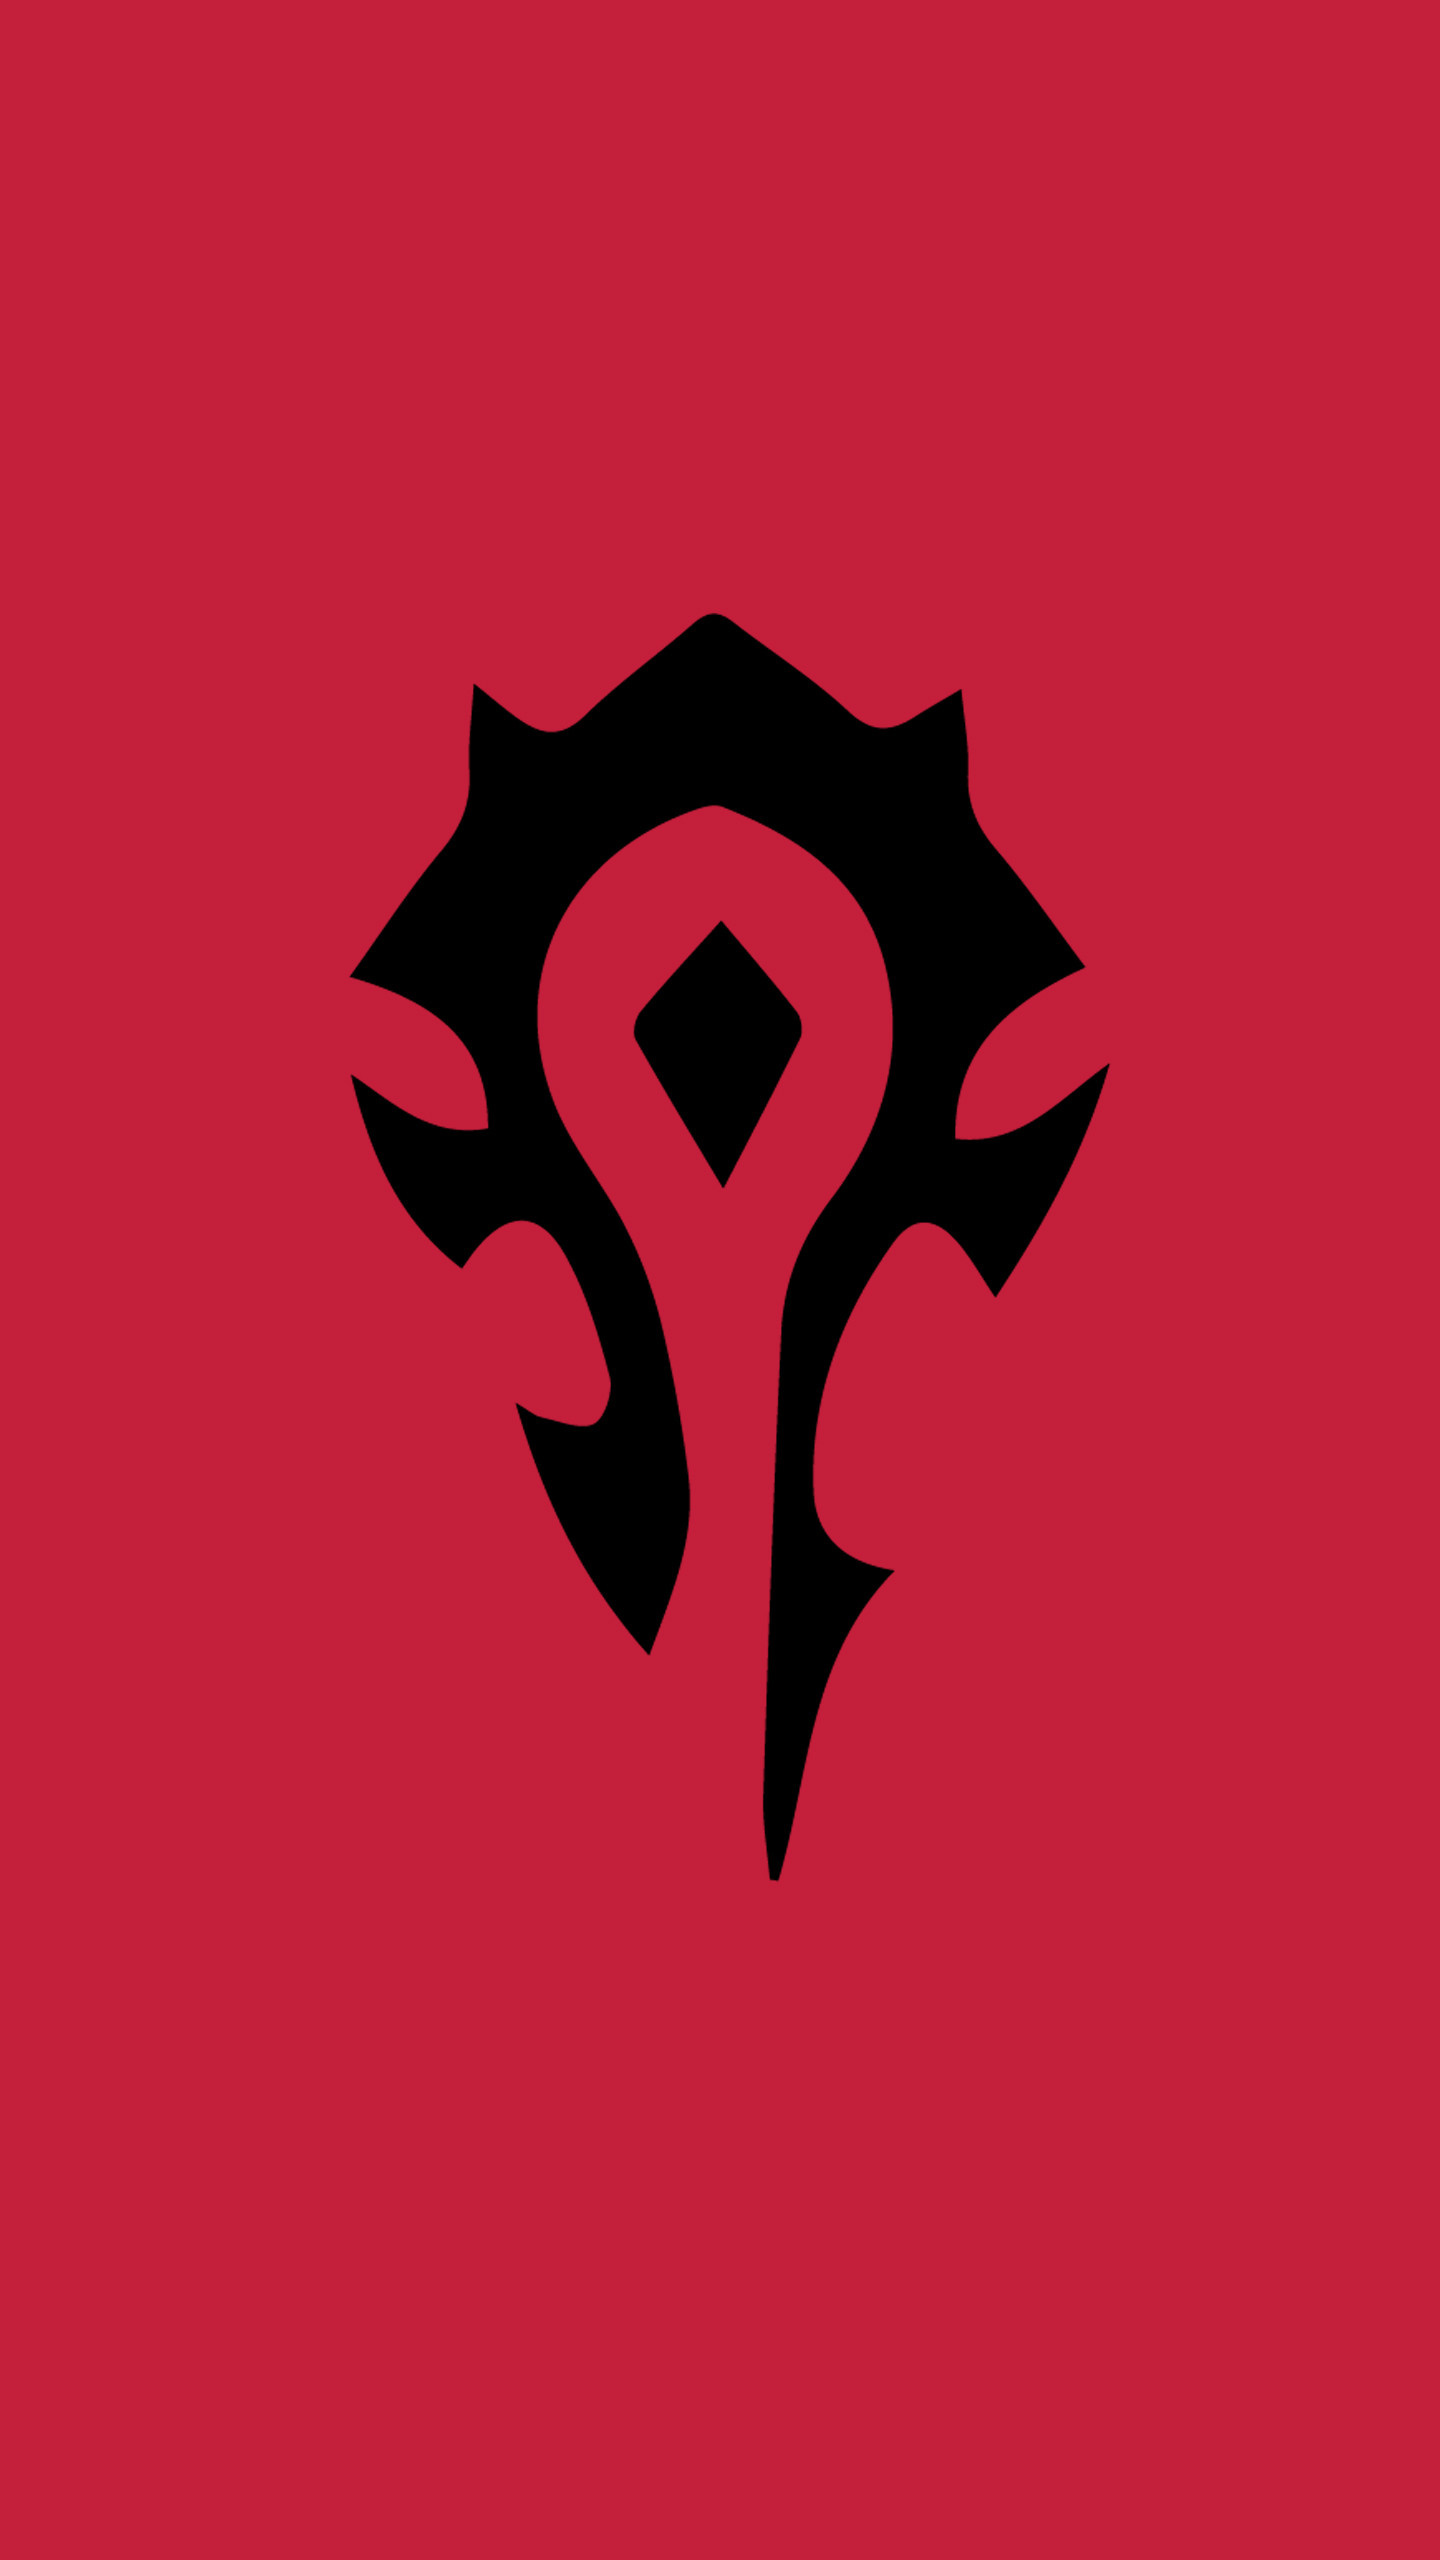 Horde Logo Wow posted by John Sellers 1440x2560